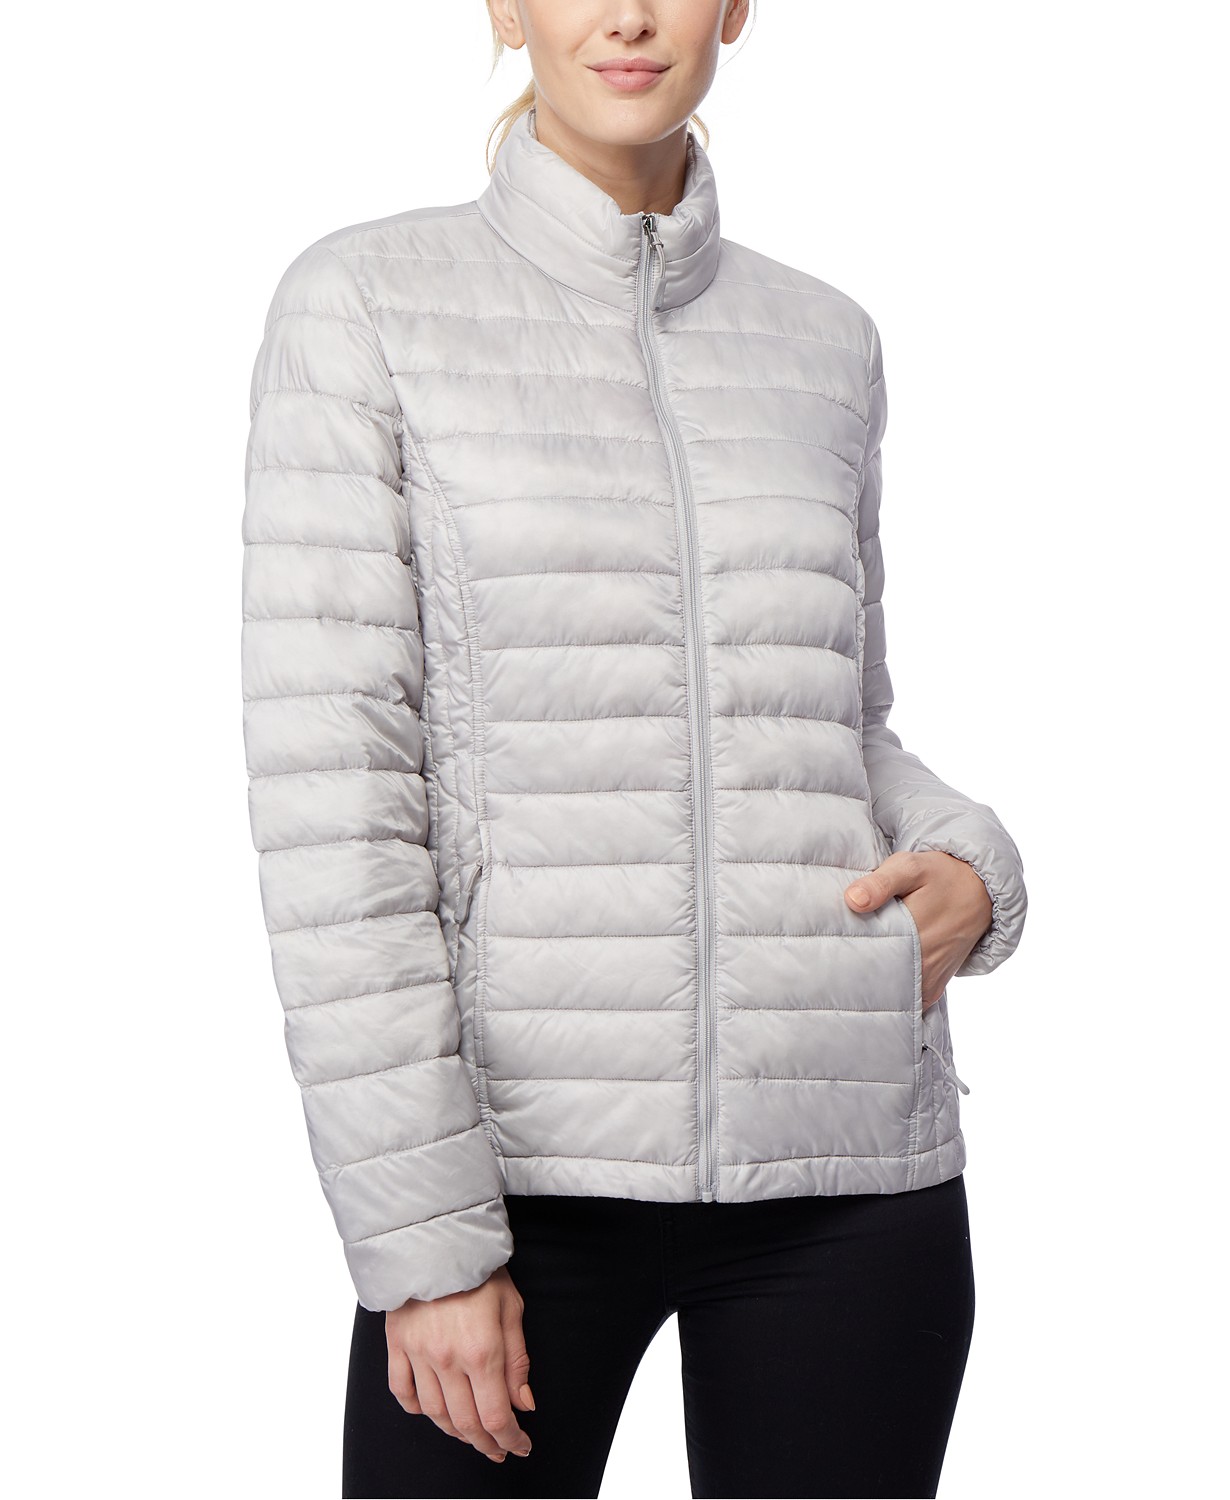 woocommerce-673321-2209615.cloudwaysapps.com-32-degrees-womens-silver-packable-down-puffer-coat-jacket